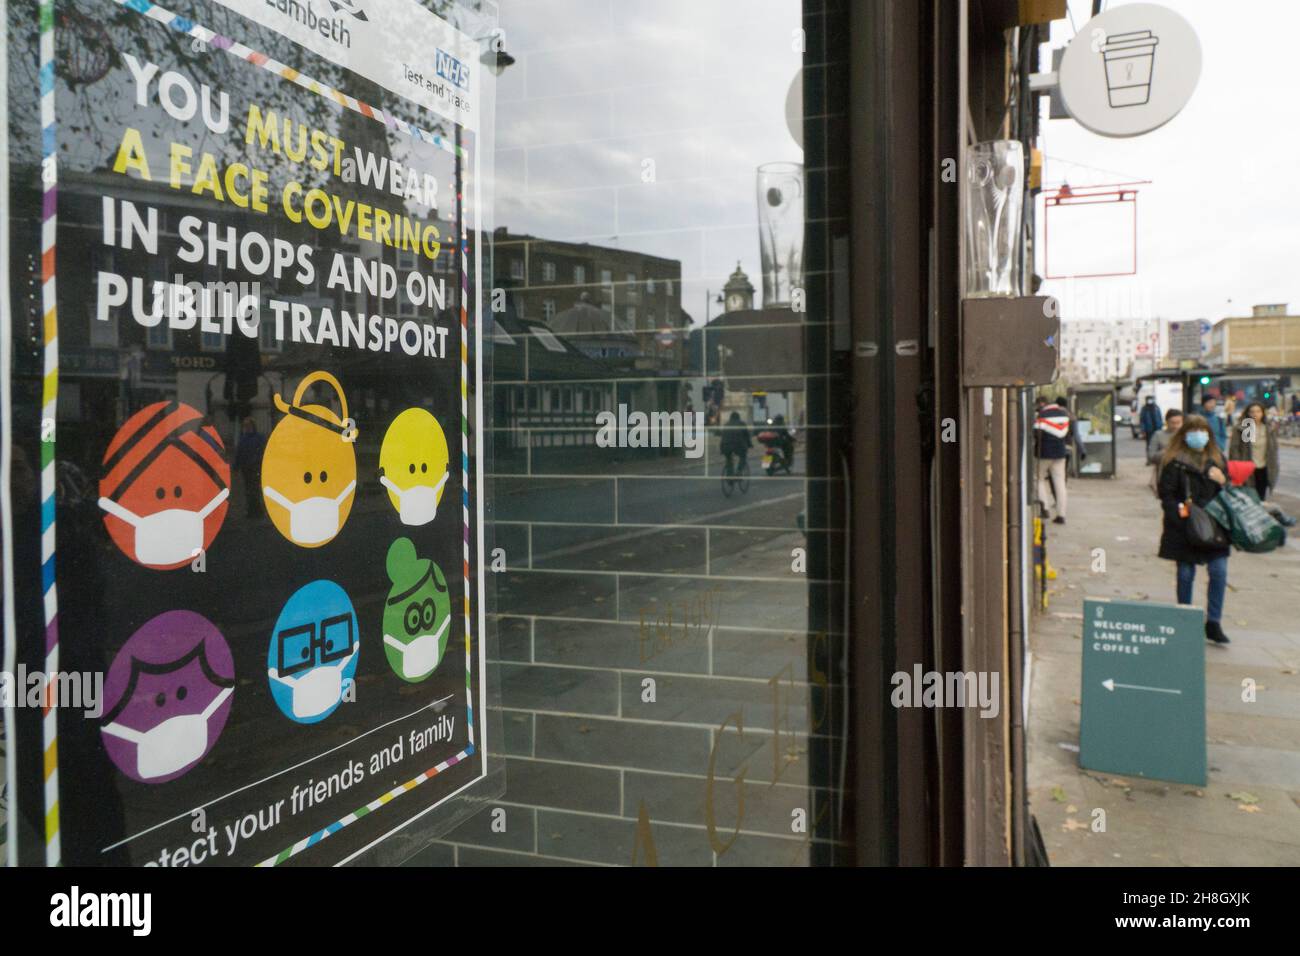 London, UK, 30 November 2021: In Clapham shoppers are now obliged by law to wear a face mask in shops or on public transport. In a shop window a colourful sign depicting a diverse array of people wearing face masks, supplied by Lambeth Council, reminds people of the change in regulations which has come into effect today. Anna Watson/Alamy Live News Stock Photo